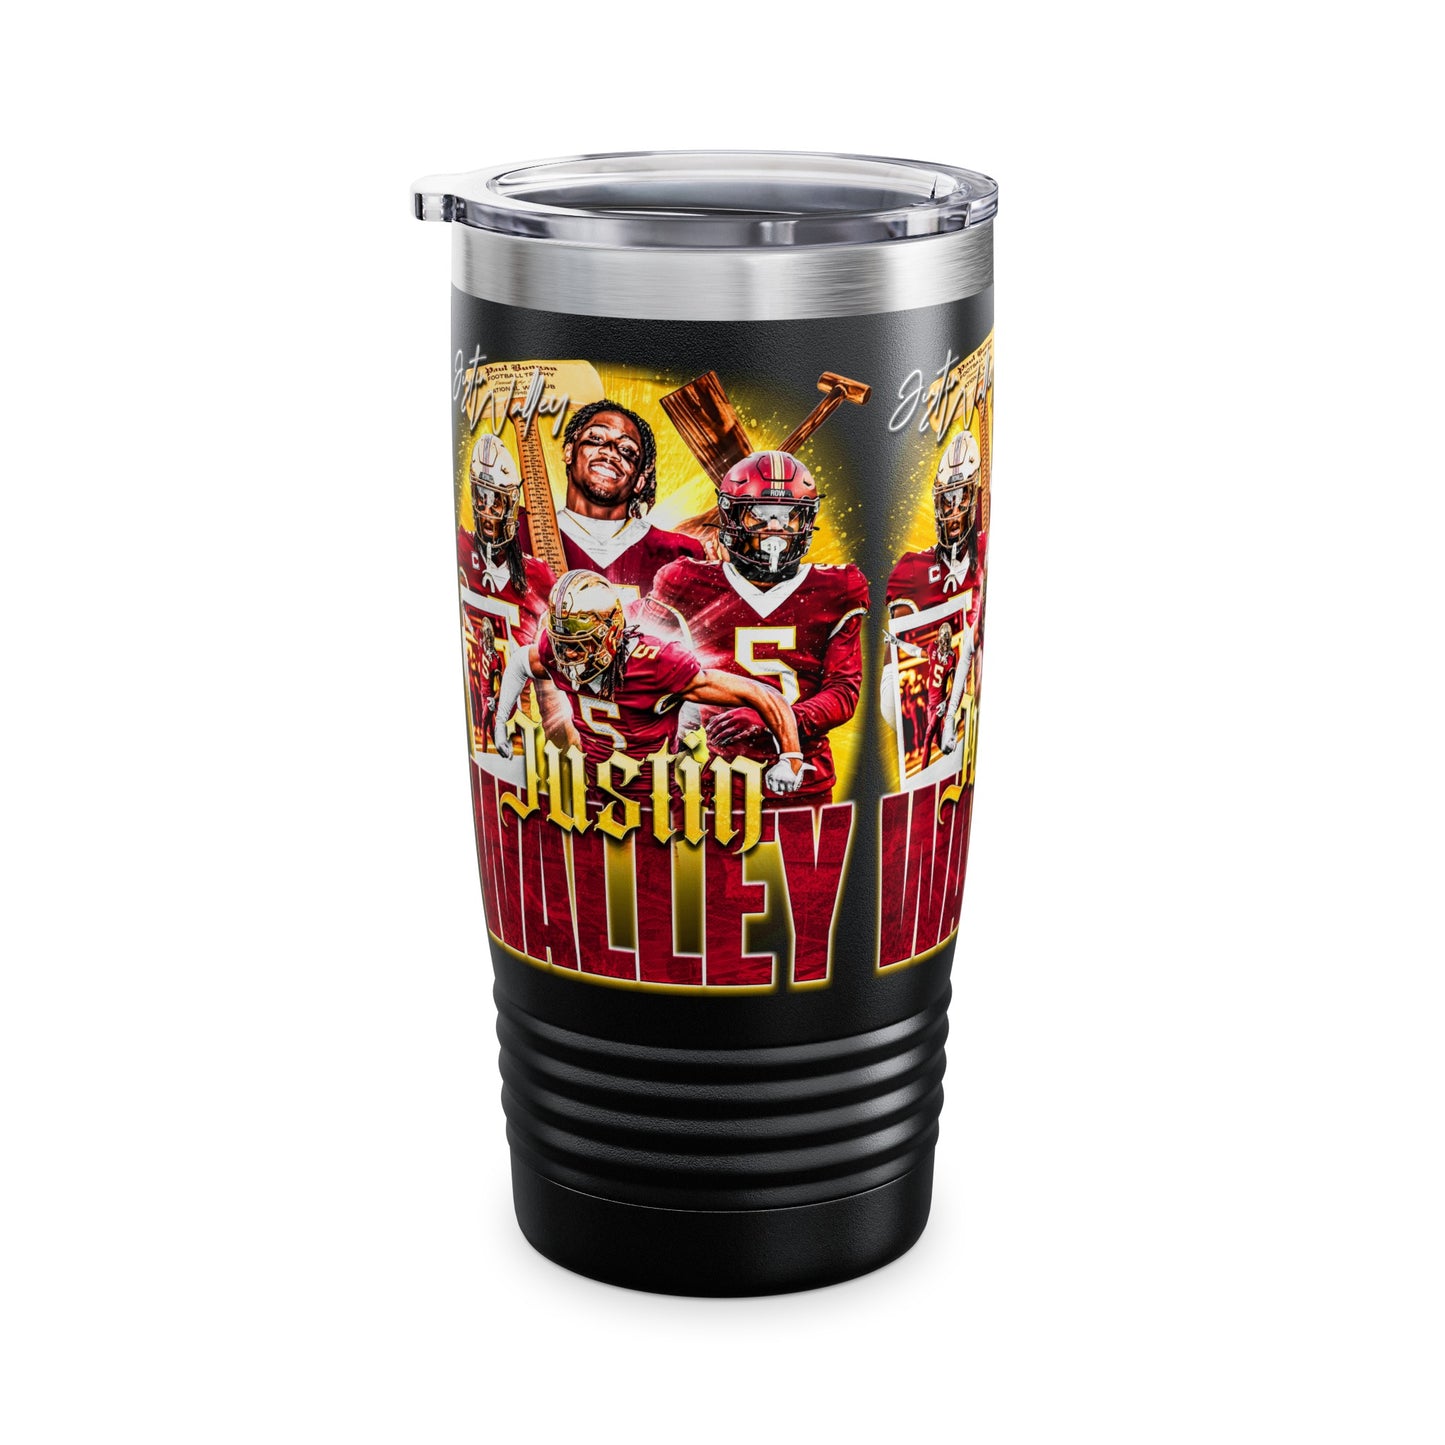 WALLEY STAINLESS STEEL TUMBLER